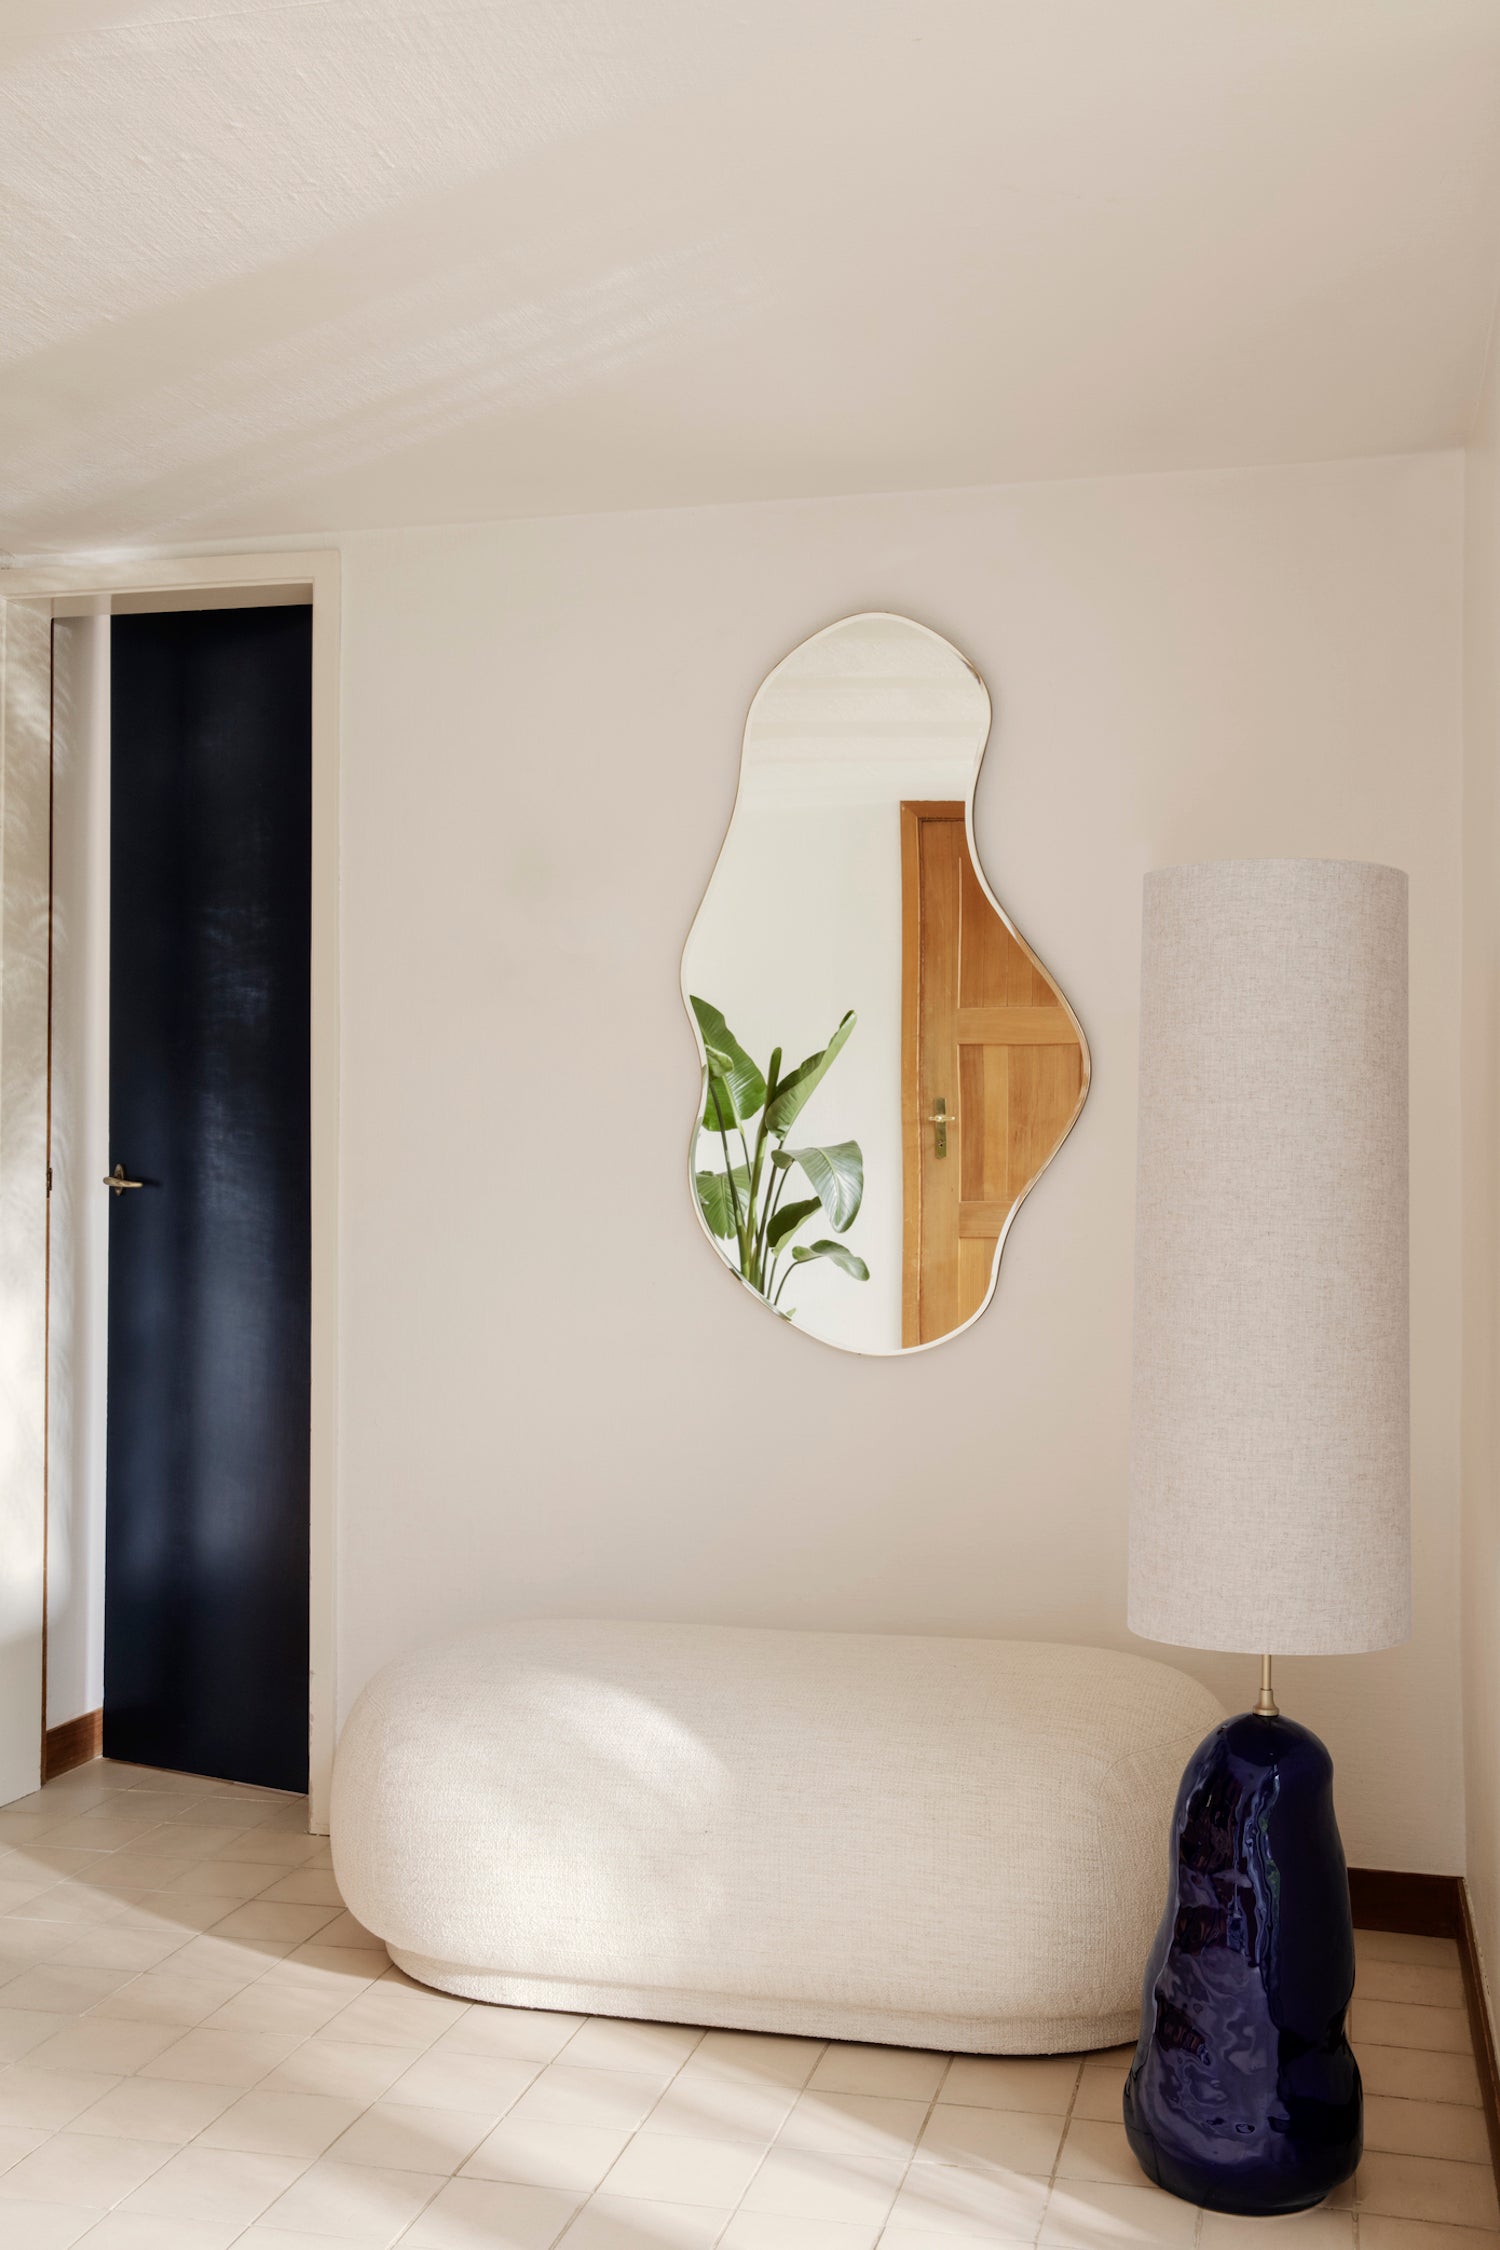 Dark Chrome Pond Mirror. Inspired by the movement of water, this inviting, open form wall mirror features a long, fluid shape with edges held by a slim, dark chrome frame.